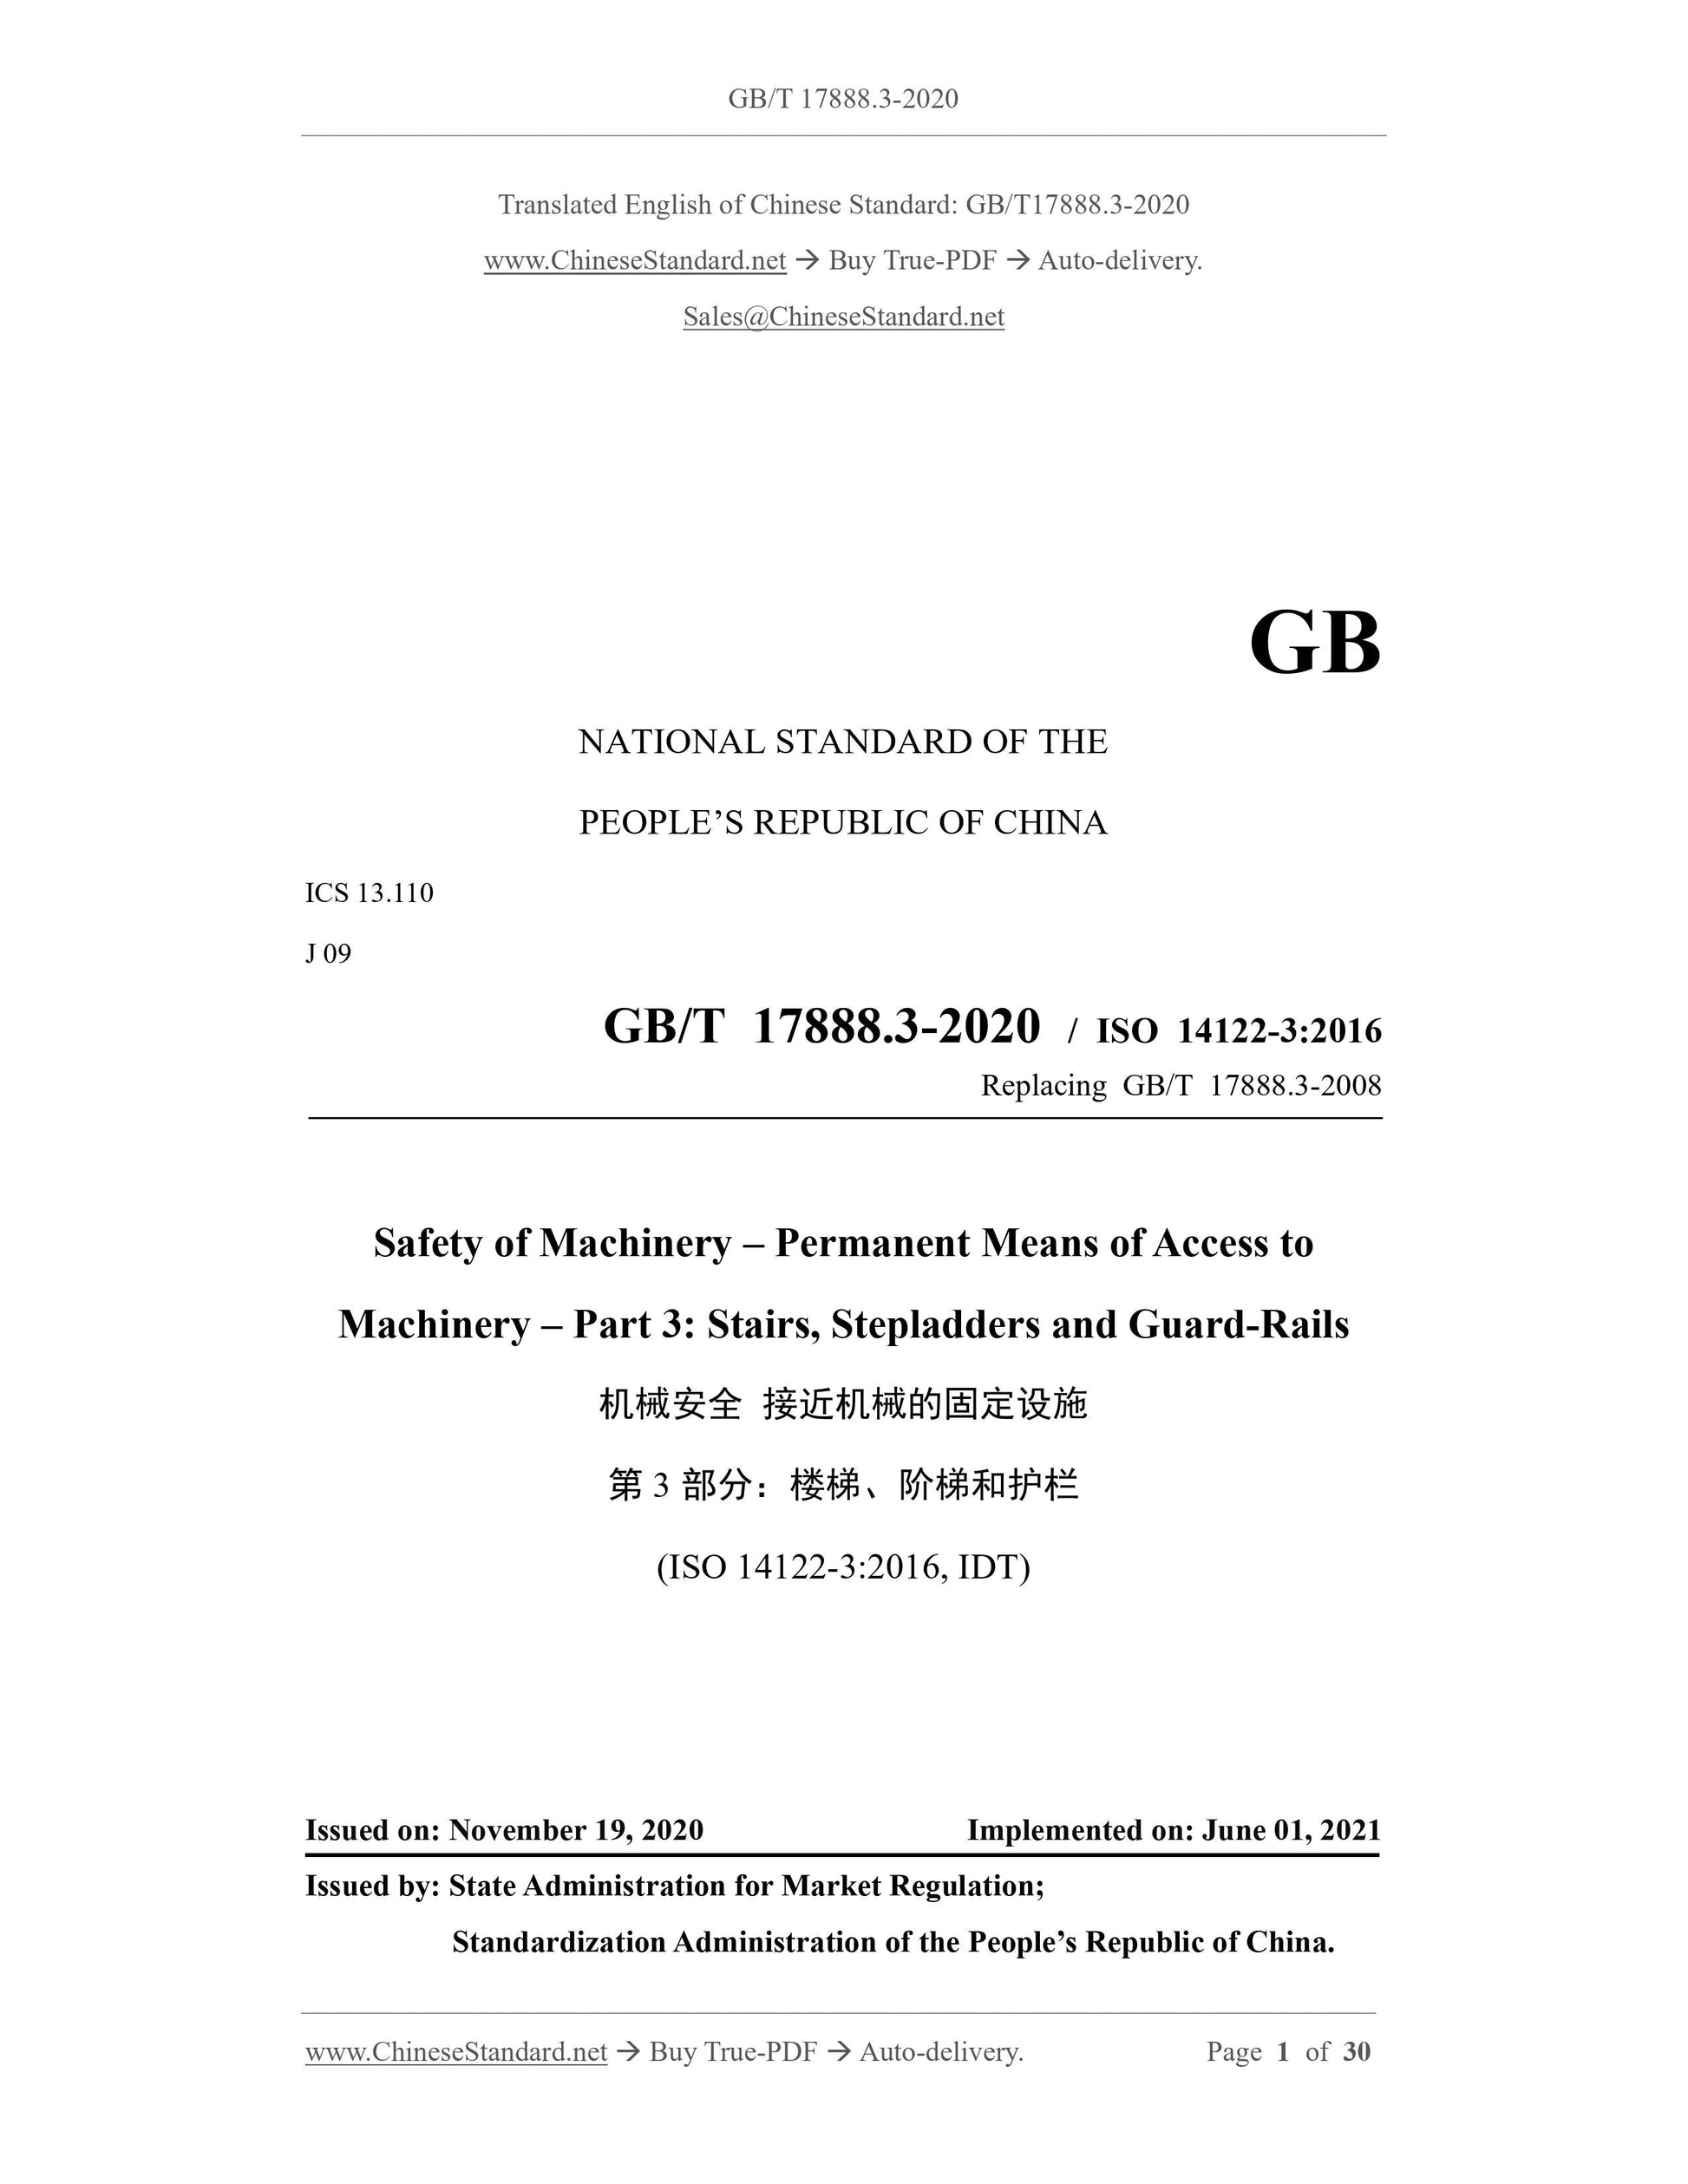 GB/T 17888.3-2020 Page 1